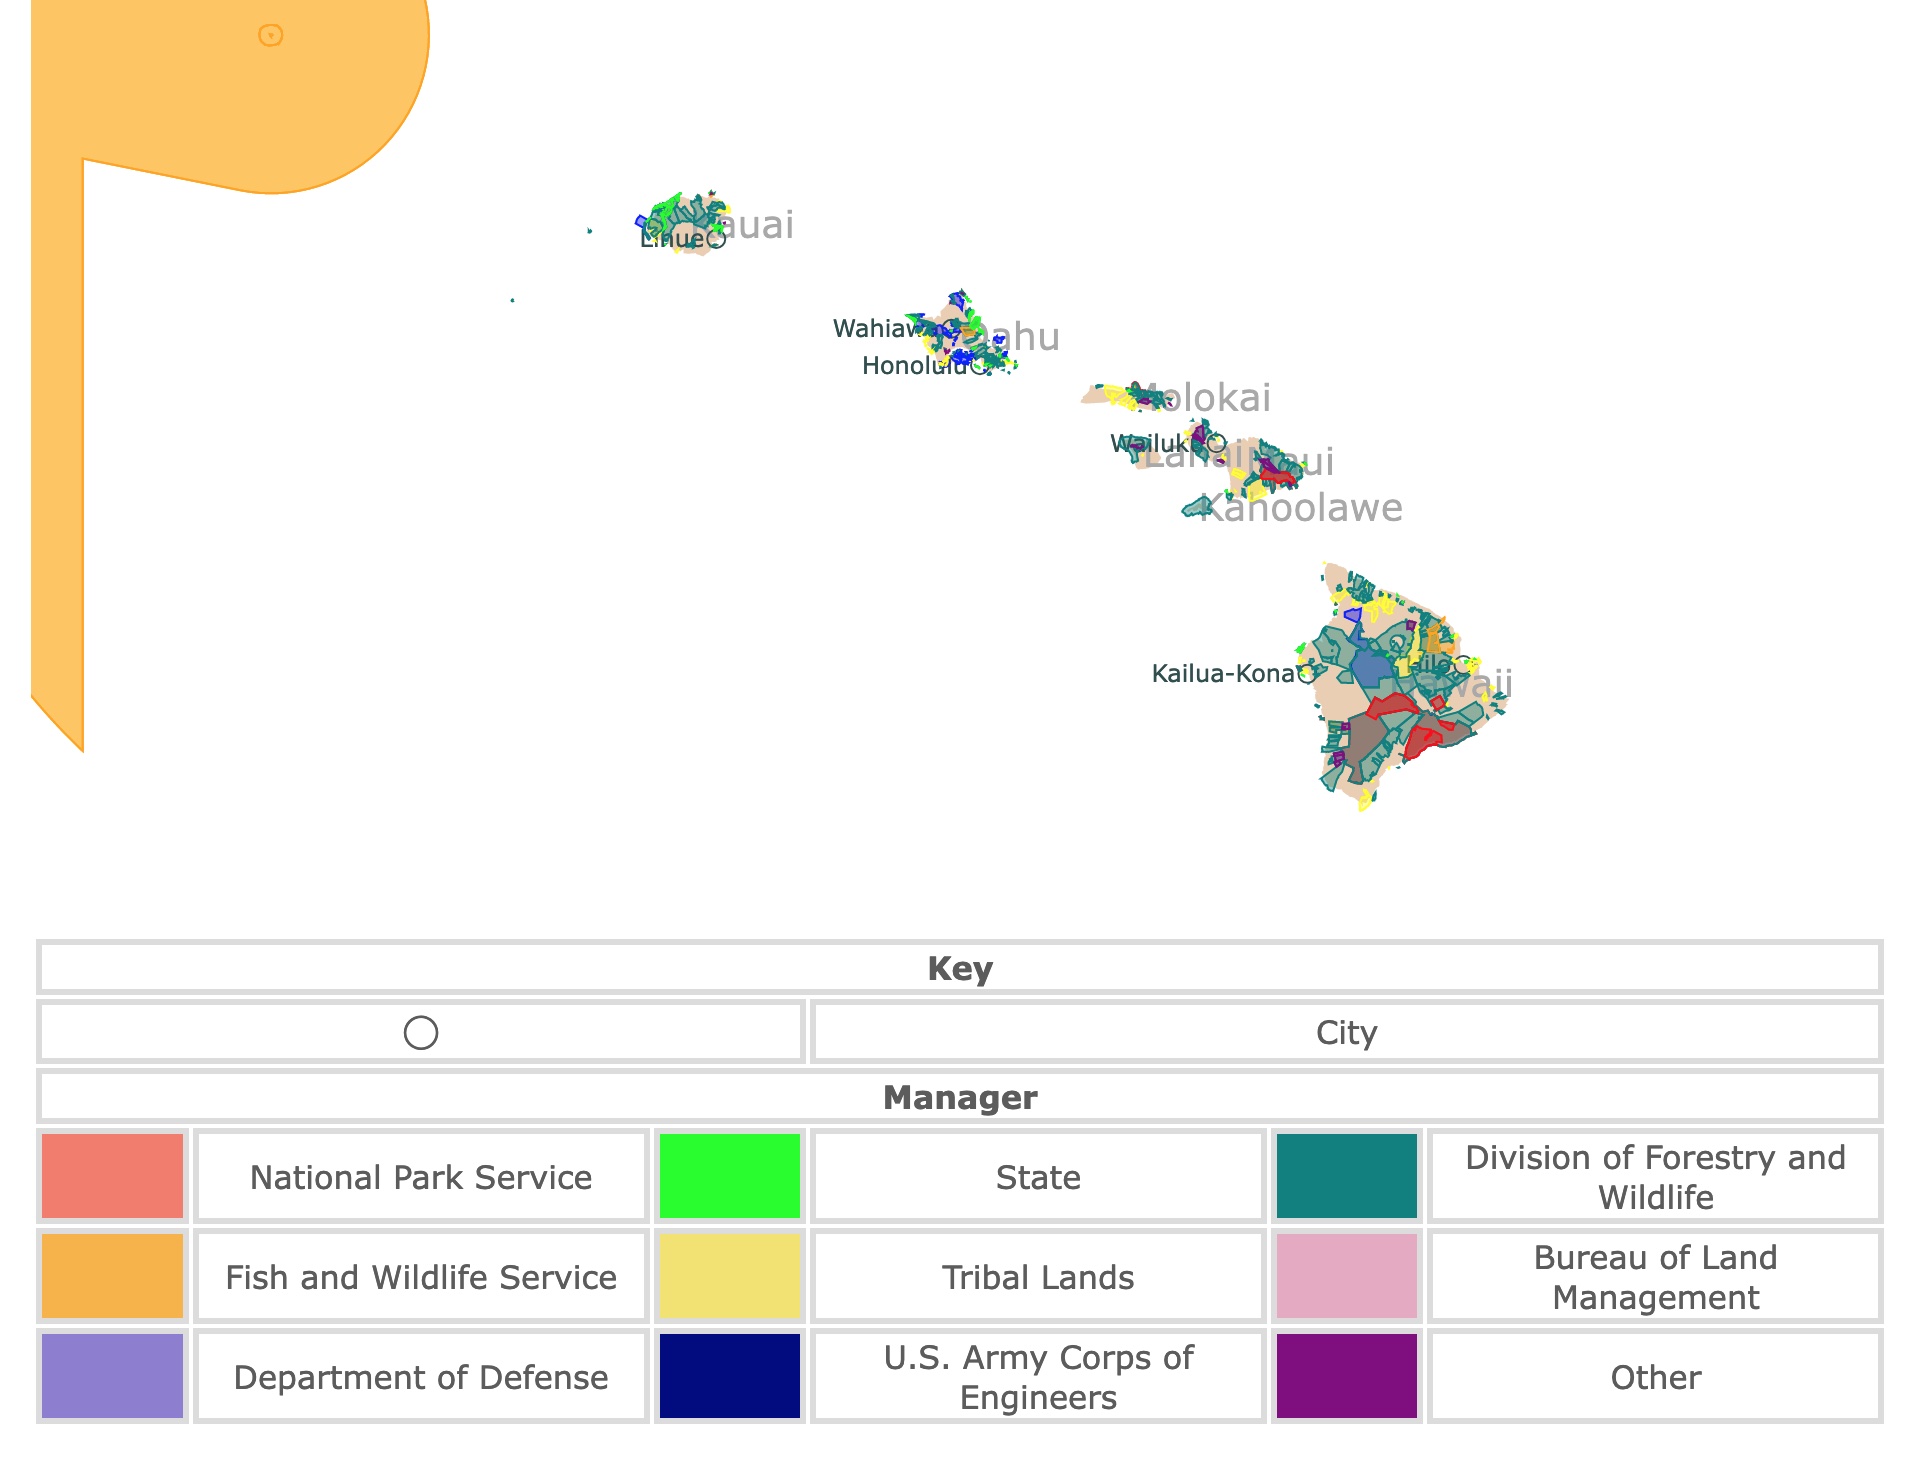 Map of Hawai'i's state parks, national parks, forests, and public lands areas